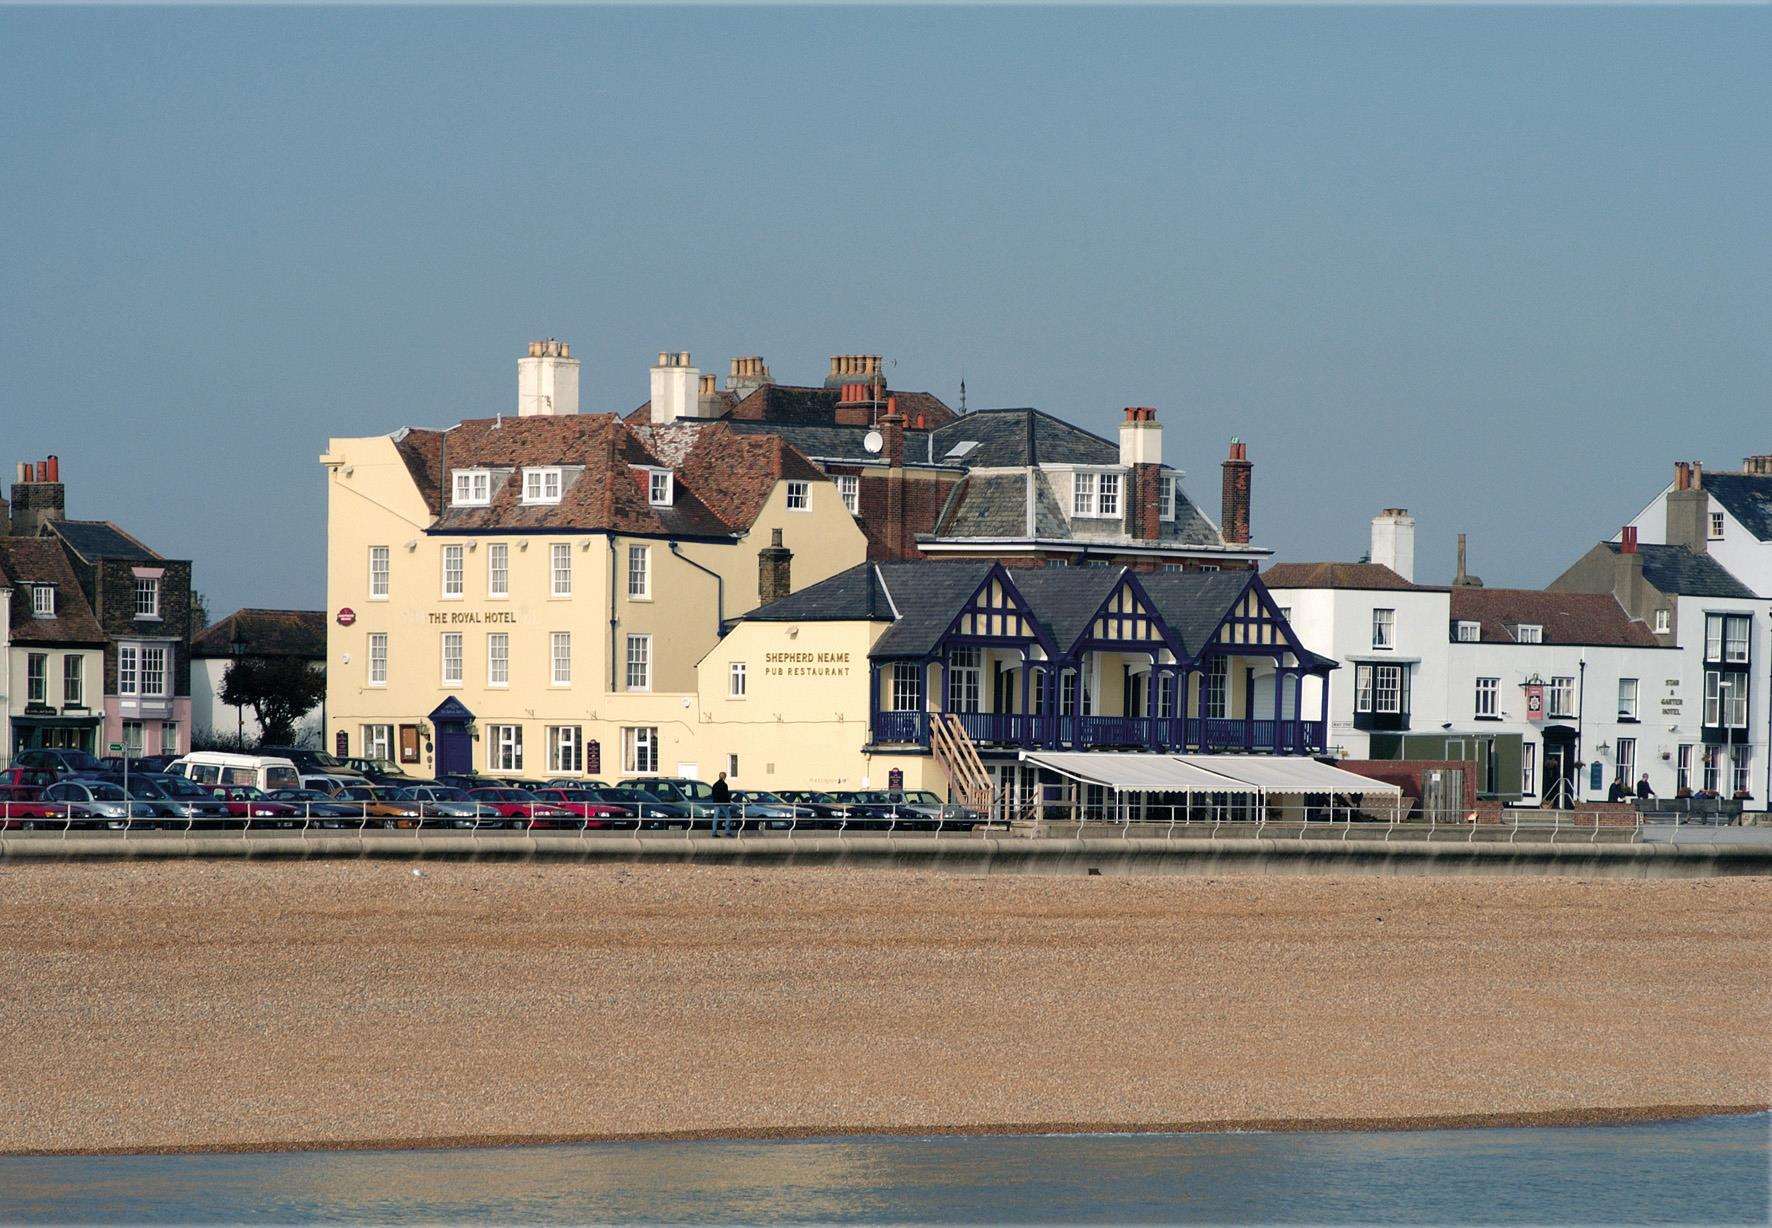 The Royal Hotel in Deal